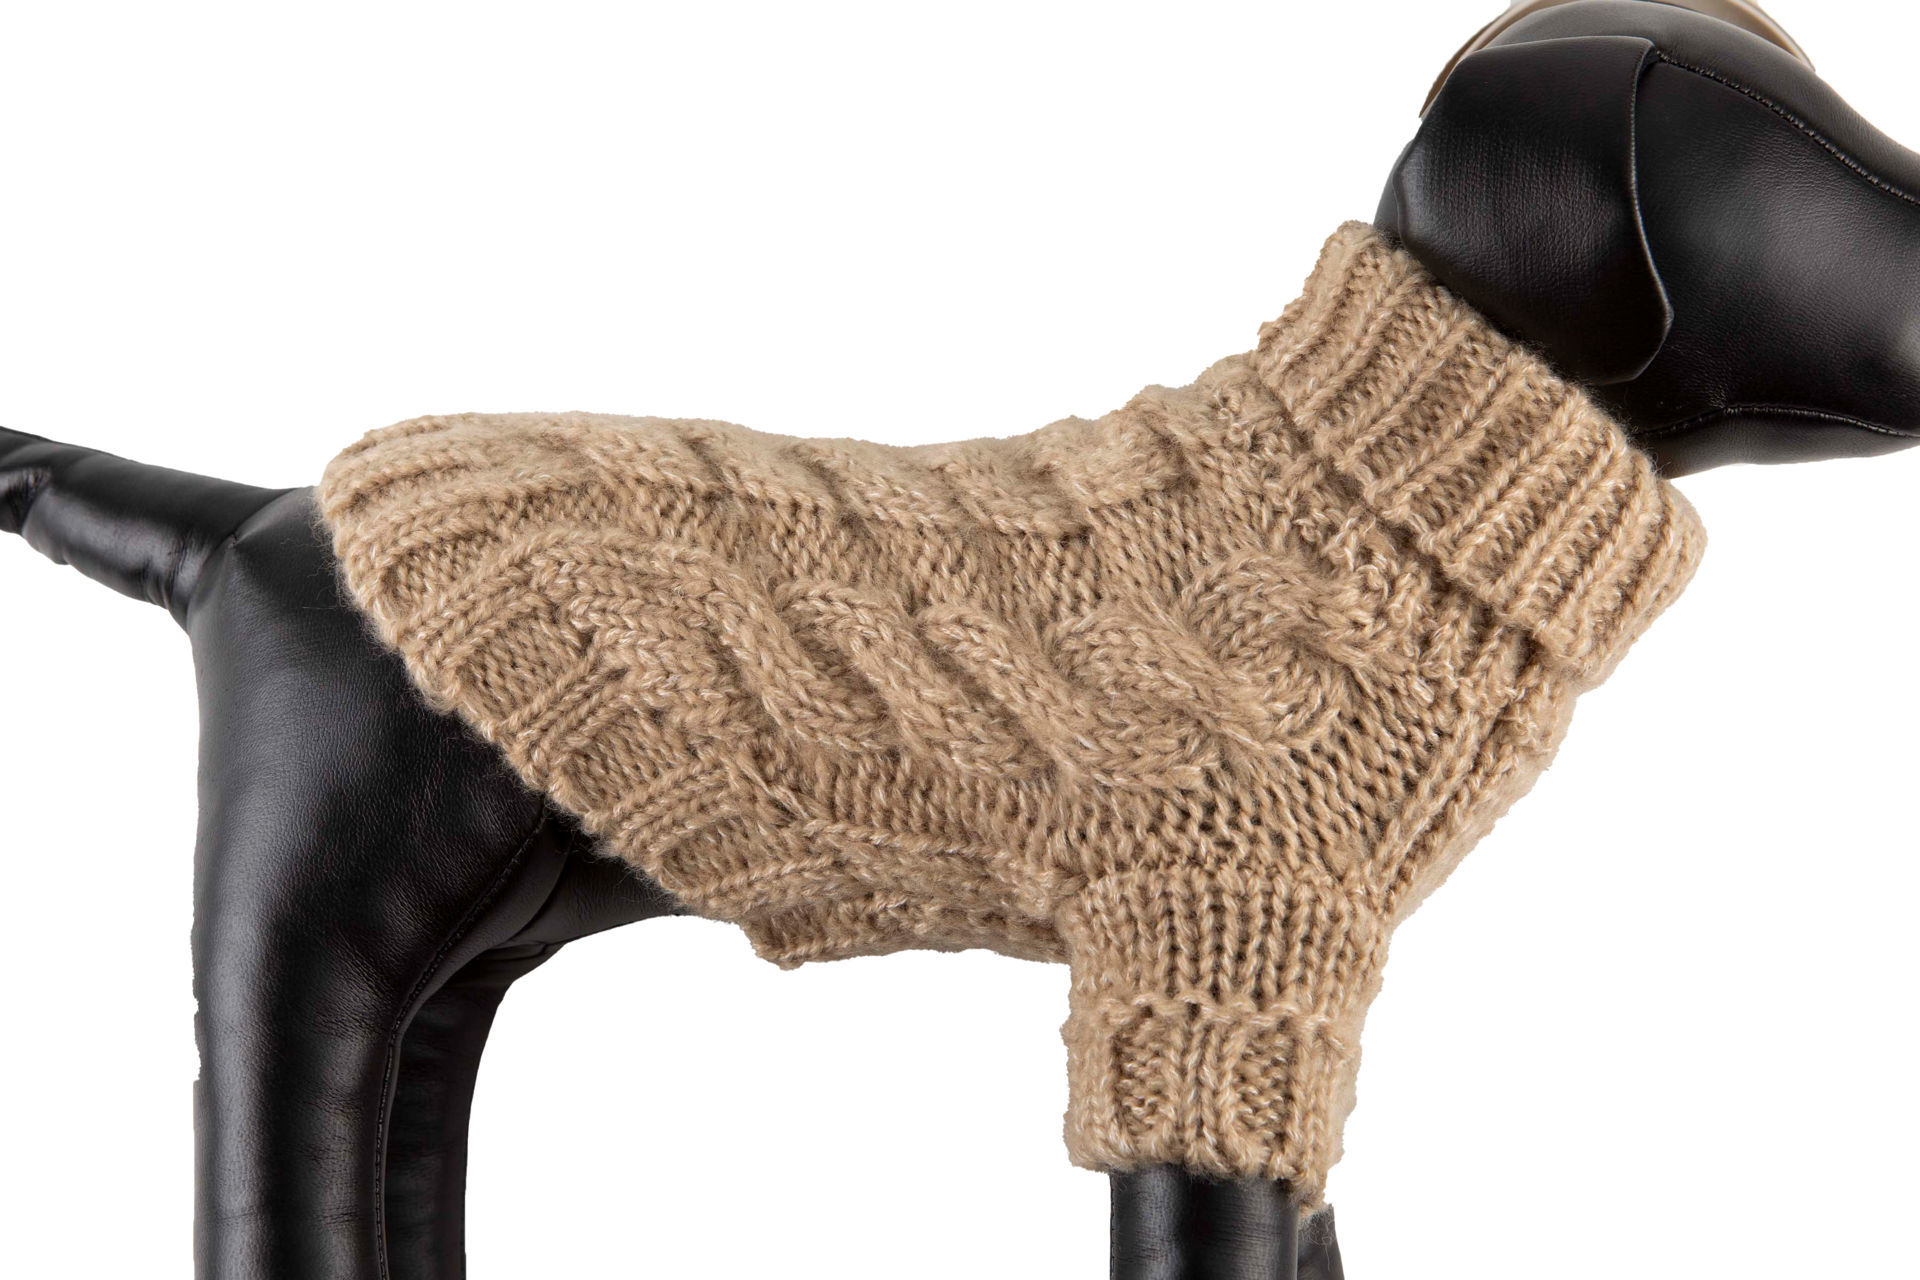 Picture of Sand Angora Cable Knit Sweater